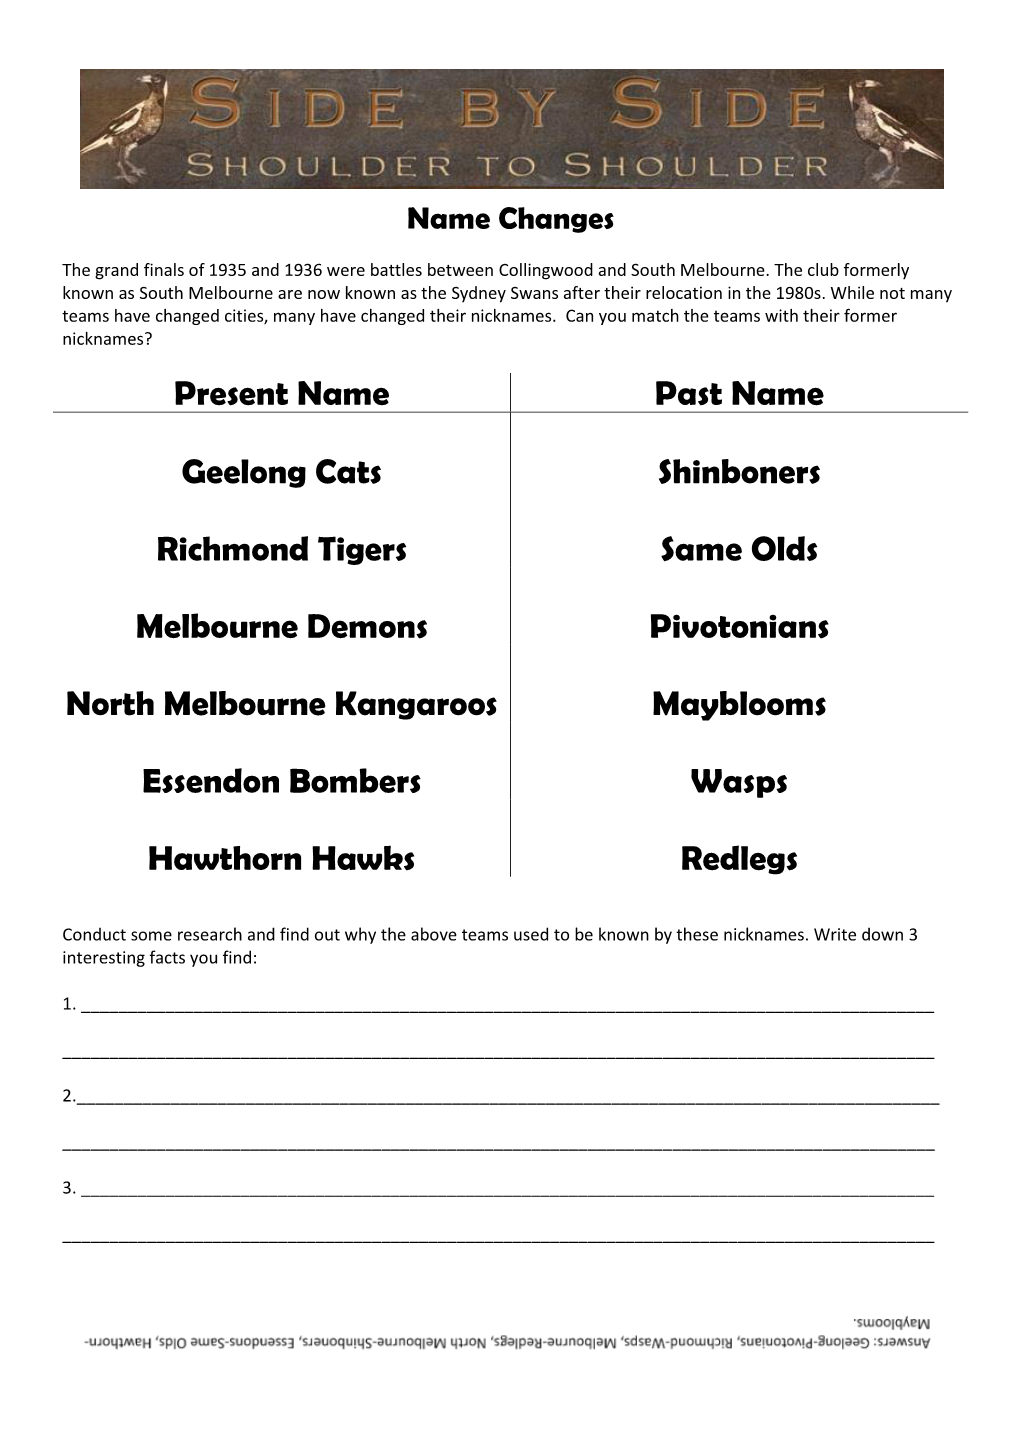 Present Name Past Name Geelong Cats Shinboners Richmond Tigers Same Olds Melbourne Demons Pivotonians North Melbourne Kangaroos